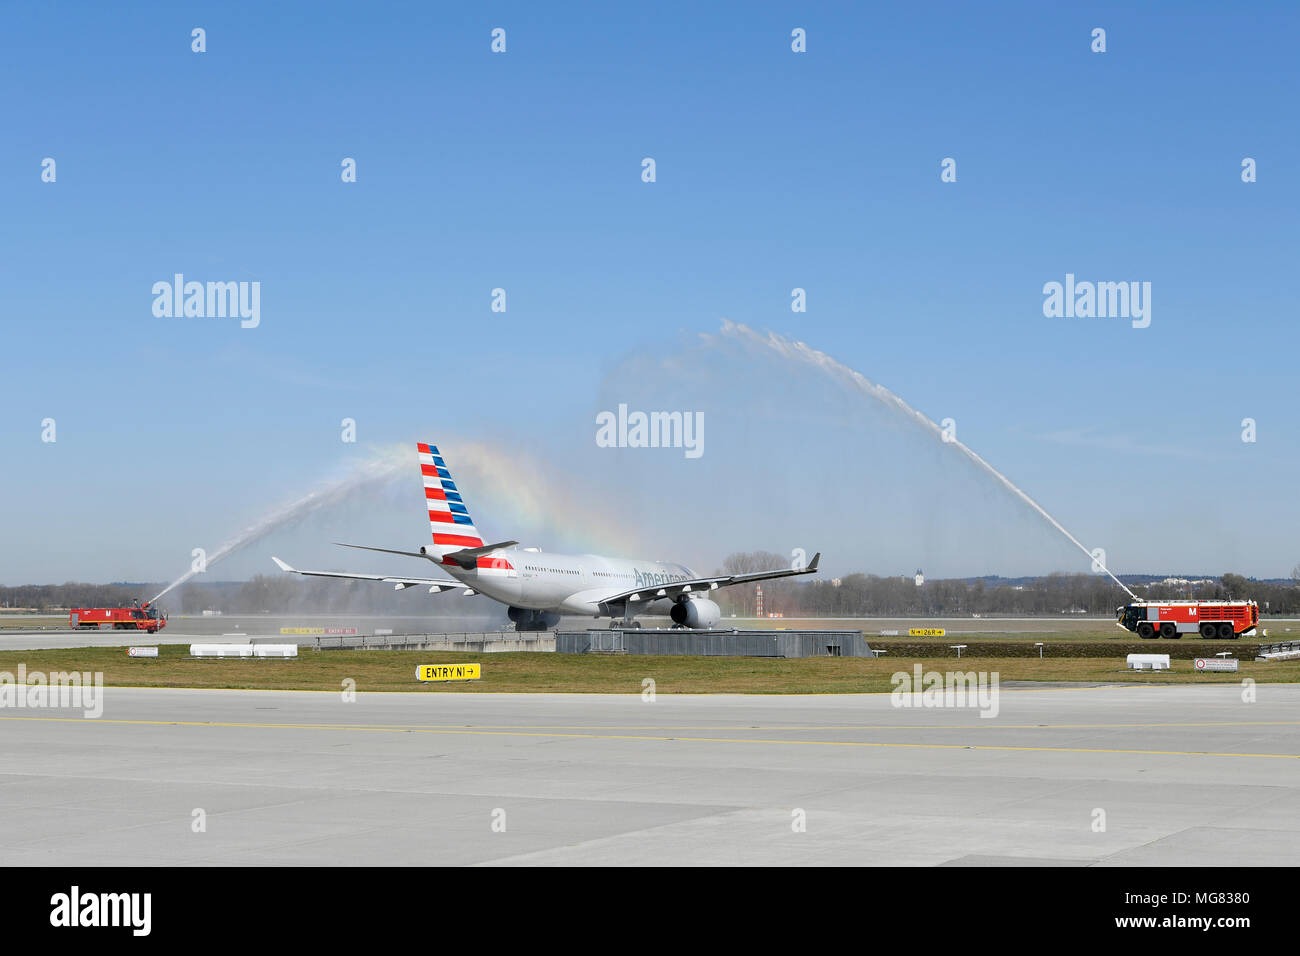 American Airlines, A330-243, A 330, 200, pilots saying goodbye, retired, water baptism, Aircraft, Airplane, Plane, Airport Munich, MUC, Germany, Stock Photo